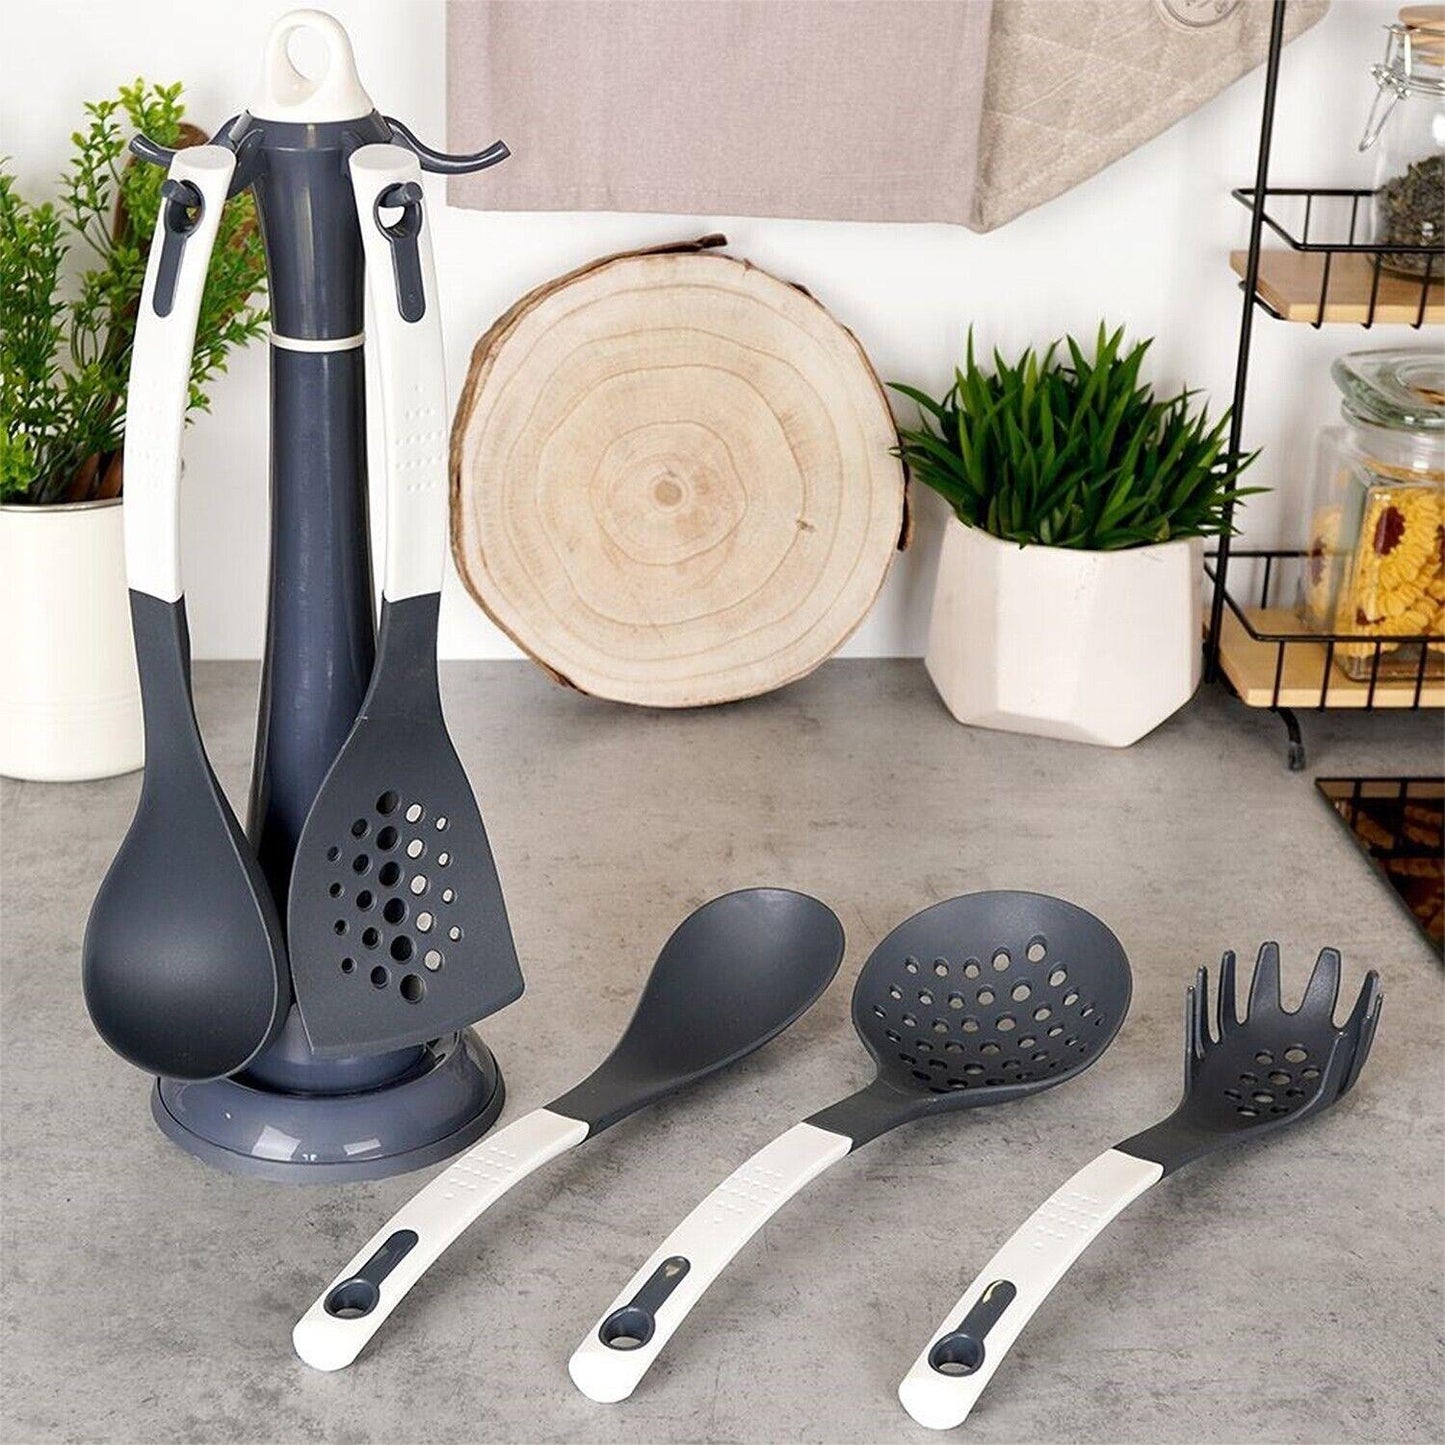 6 Pcs Kitchen Tool Set with a Stand by GEEZY - UKBuyZone